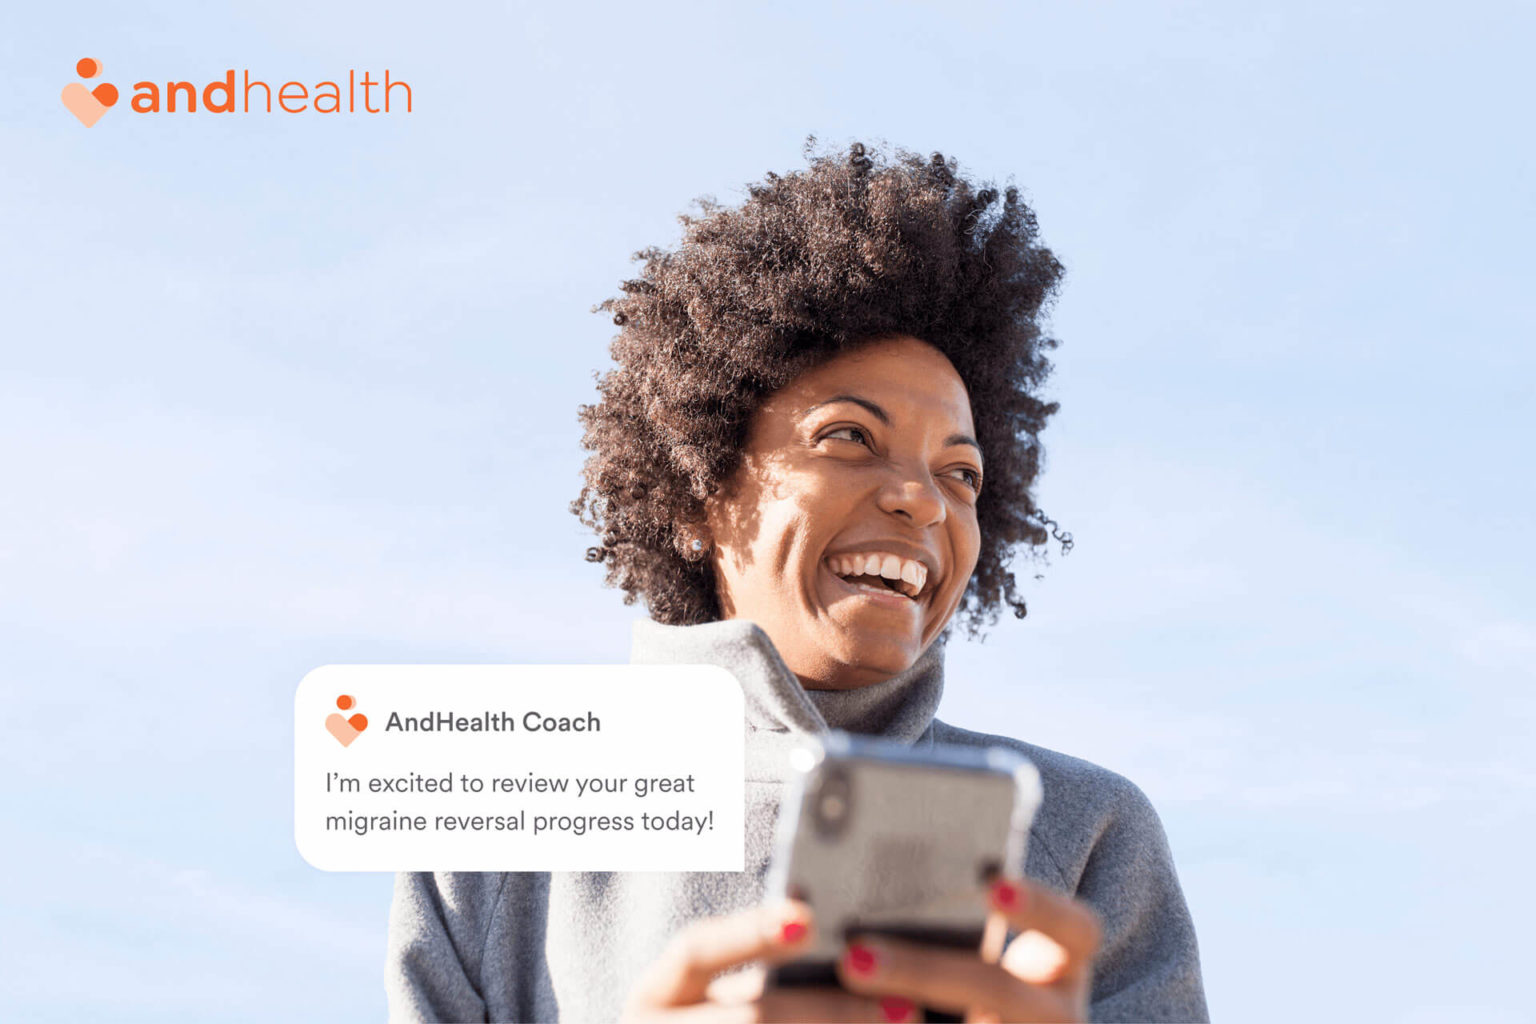 covermymeds-new-venture-andhealth